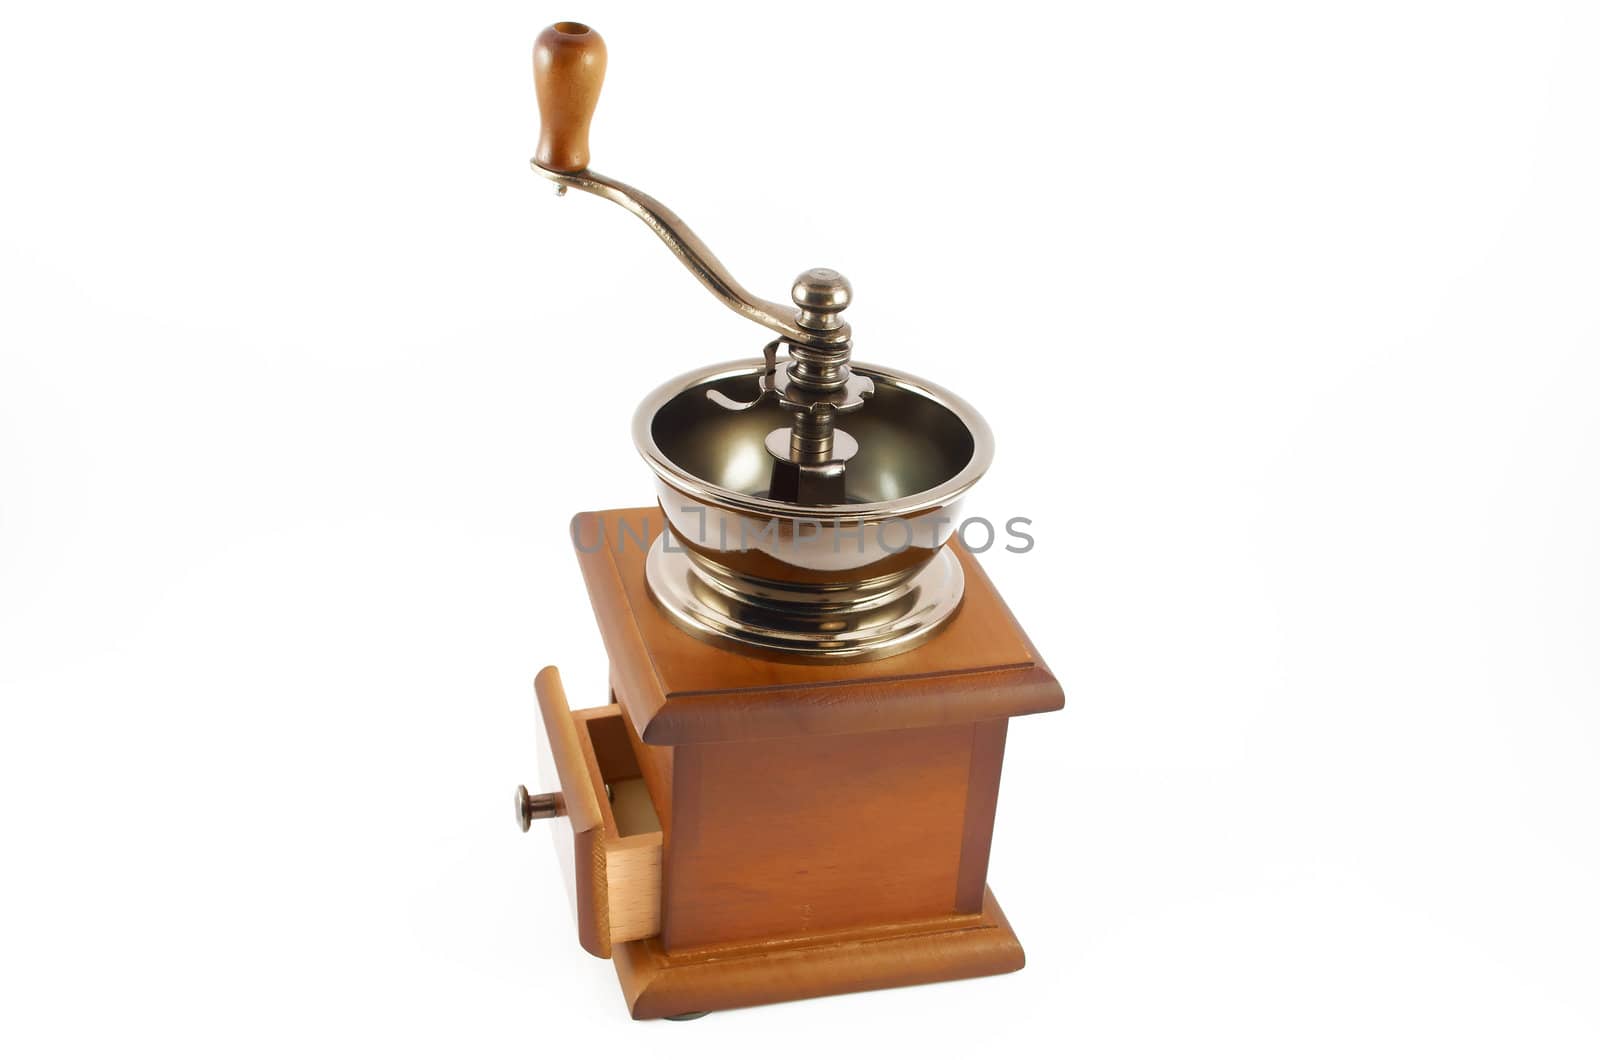 Manual coffee grinder on a white background of isolation